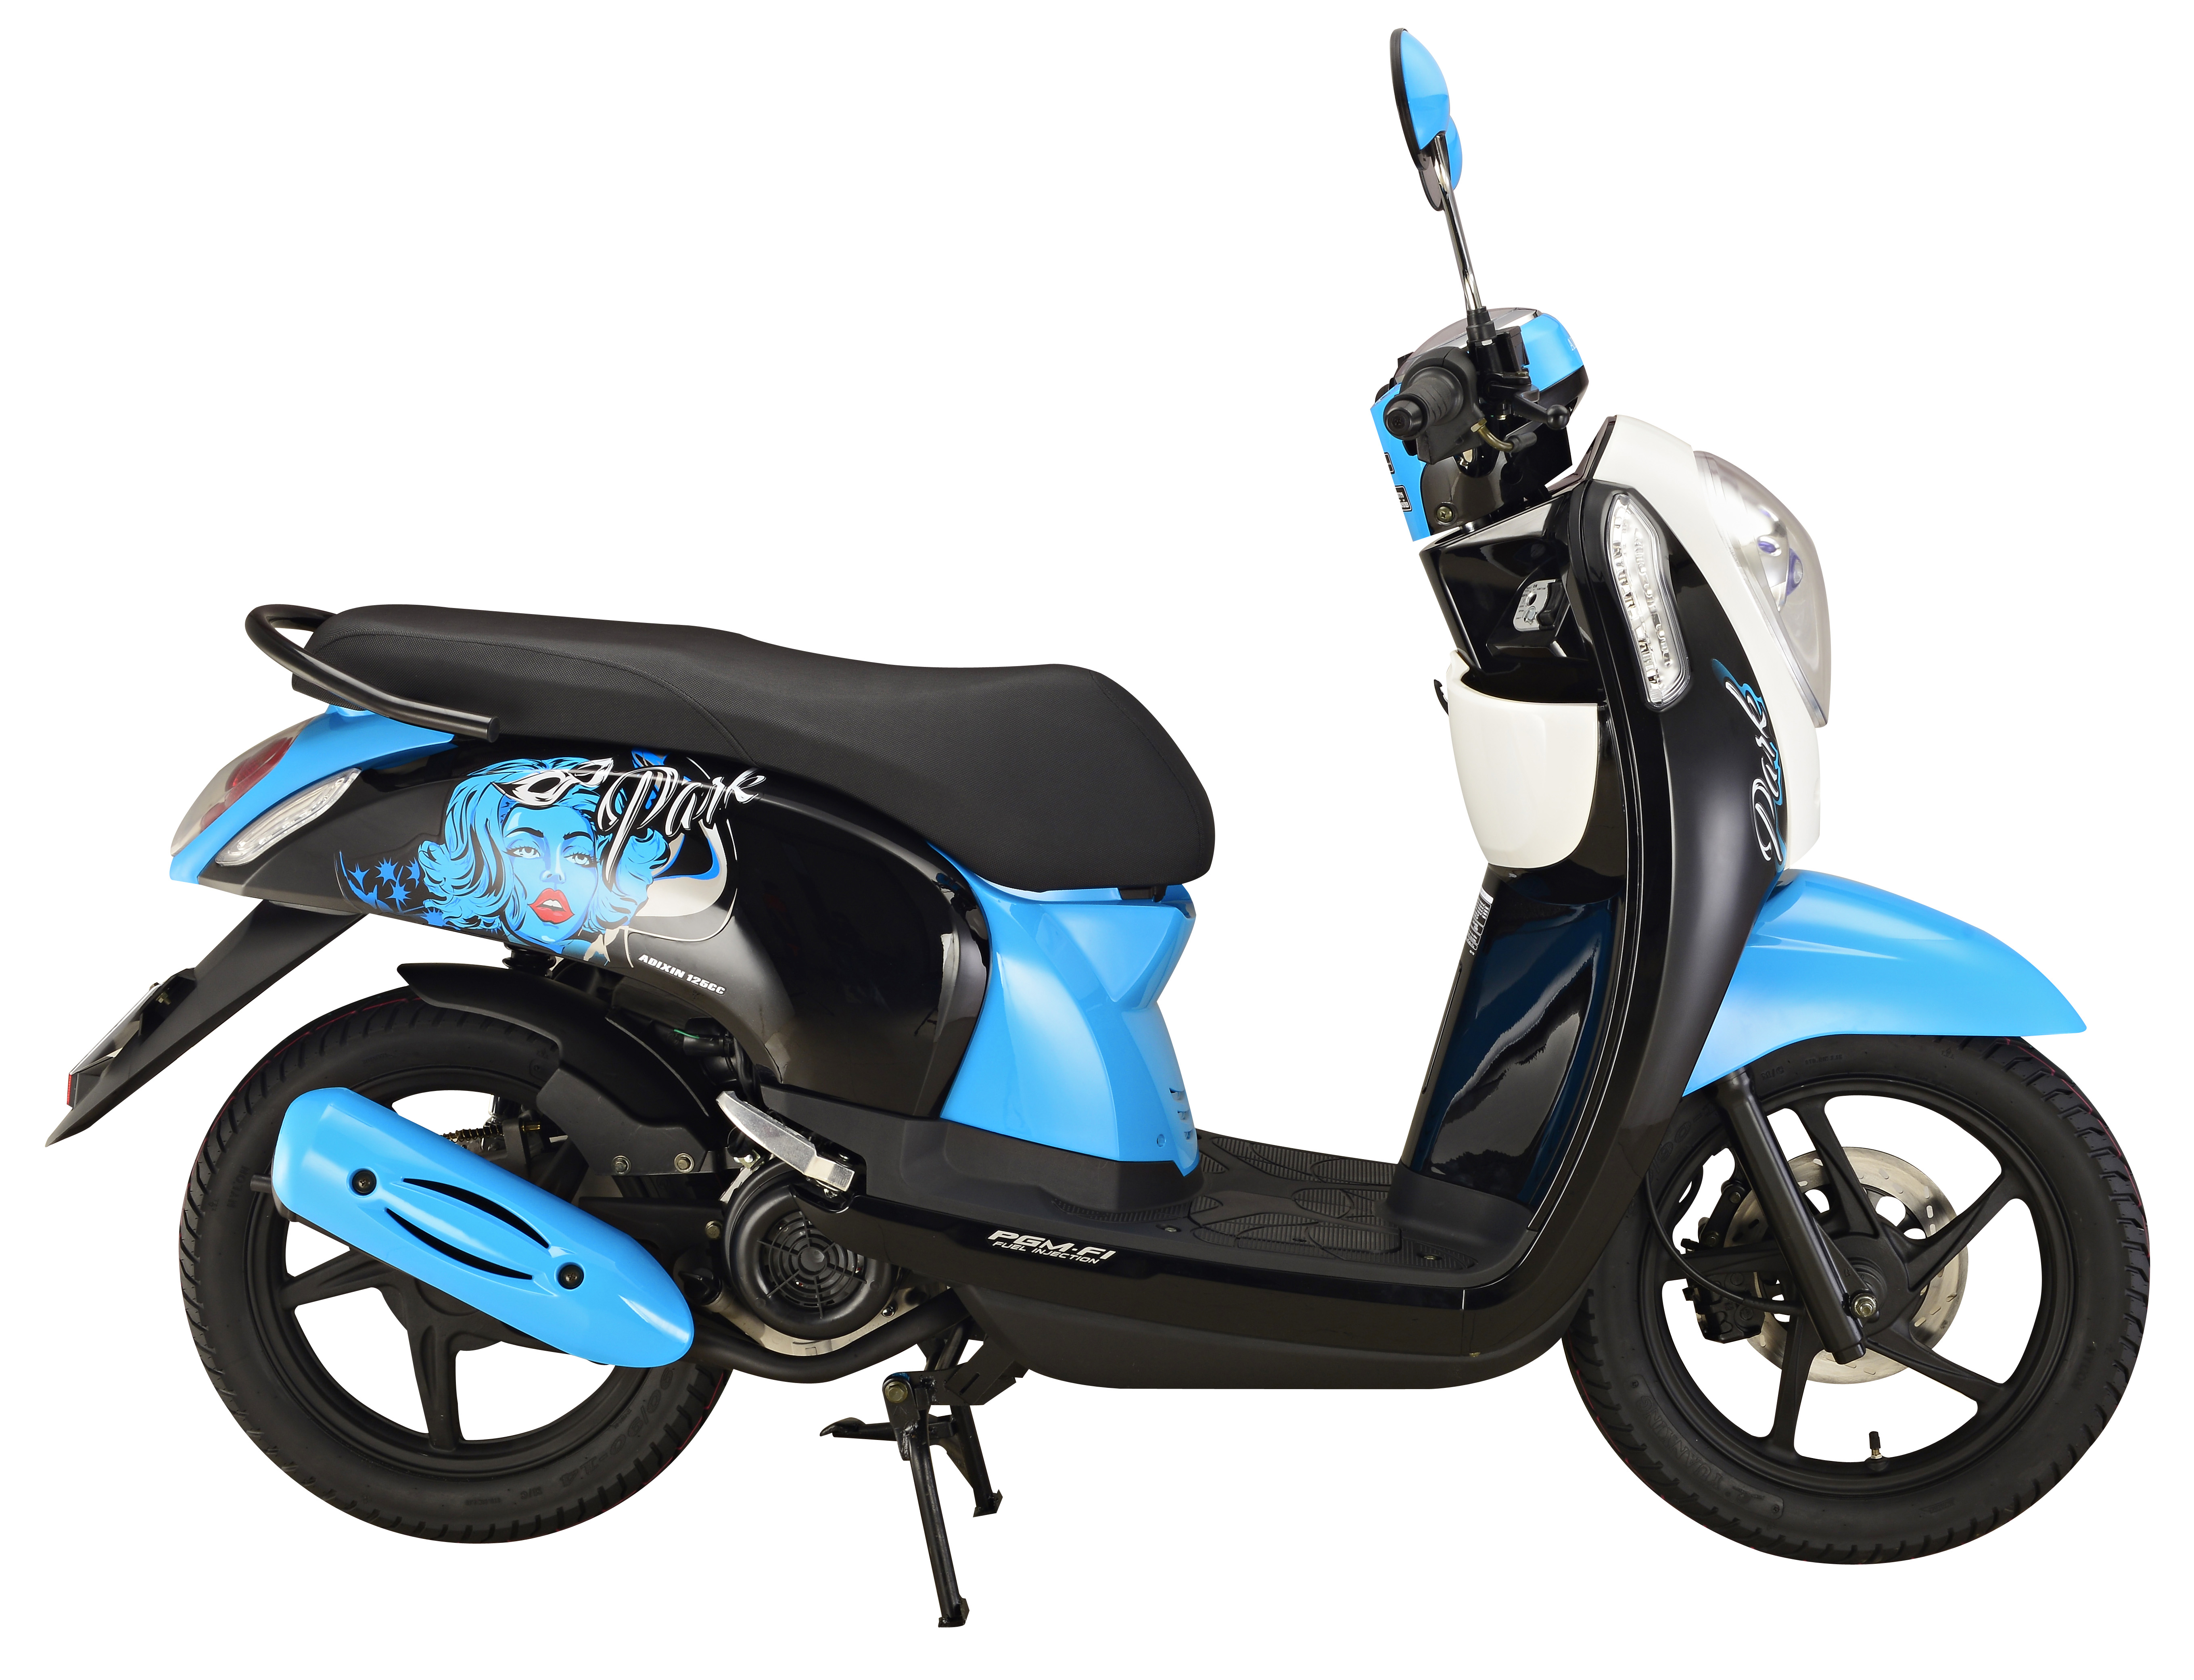 Desværre Tochi træ tema FINO style Classic 125cc Geely Motorcycle Scooter CCC CE